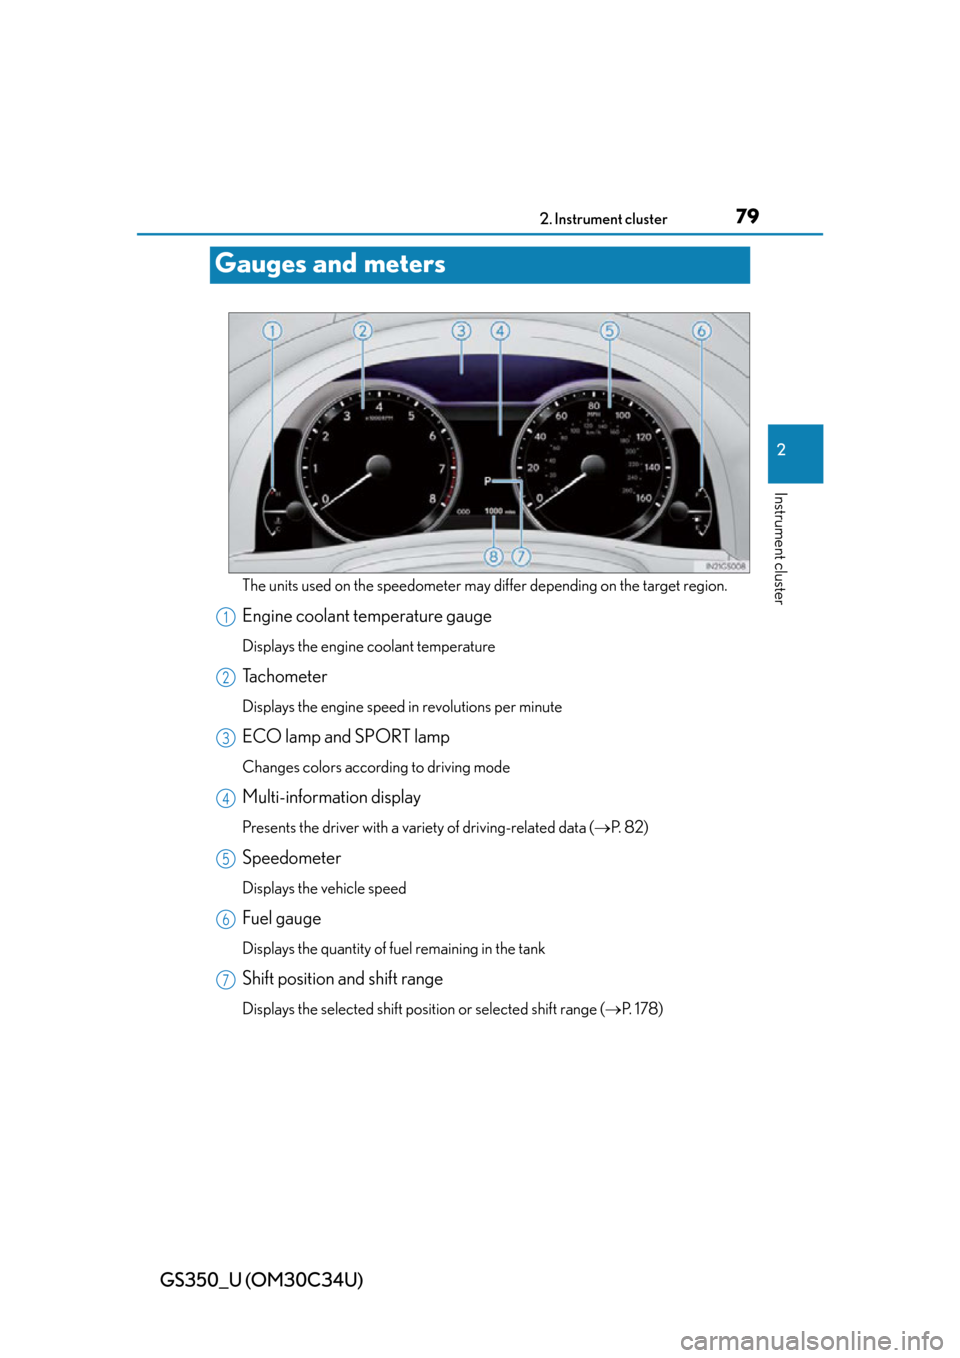 Lexus GS350 2013  Opening, closing and locking the doors and trunk / LEXUS 2013 GS350 OWNERS MANUAL (OM30C34U) 79
GS350_U (OM30C34U)2. Instrument cluster
2
Instrument cluster
Gauges and meters
The units used on the speedometer may di ffer depending on the target region.
Engine coolant temperature gauge
Display